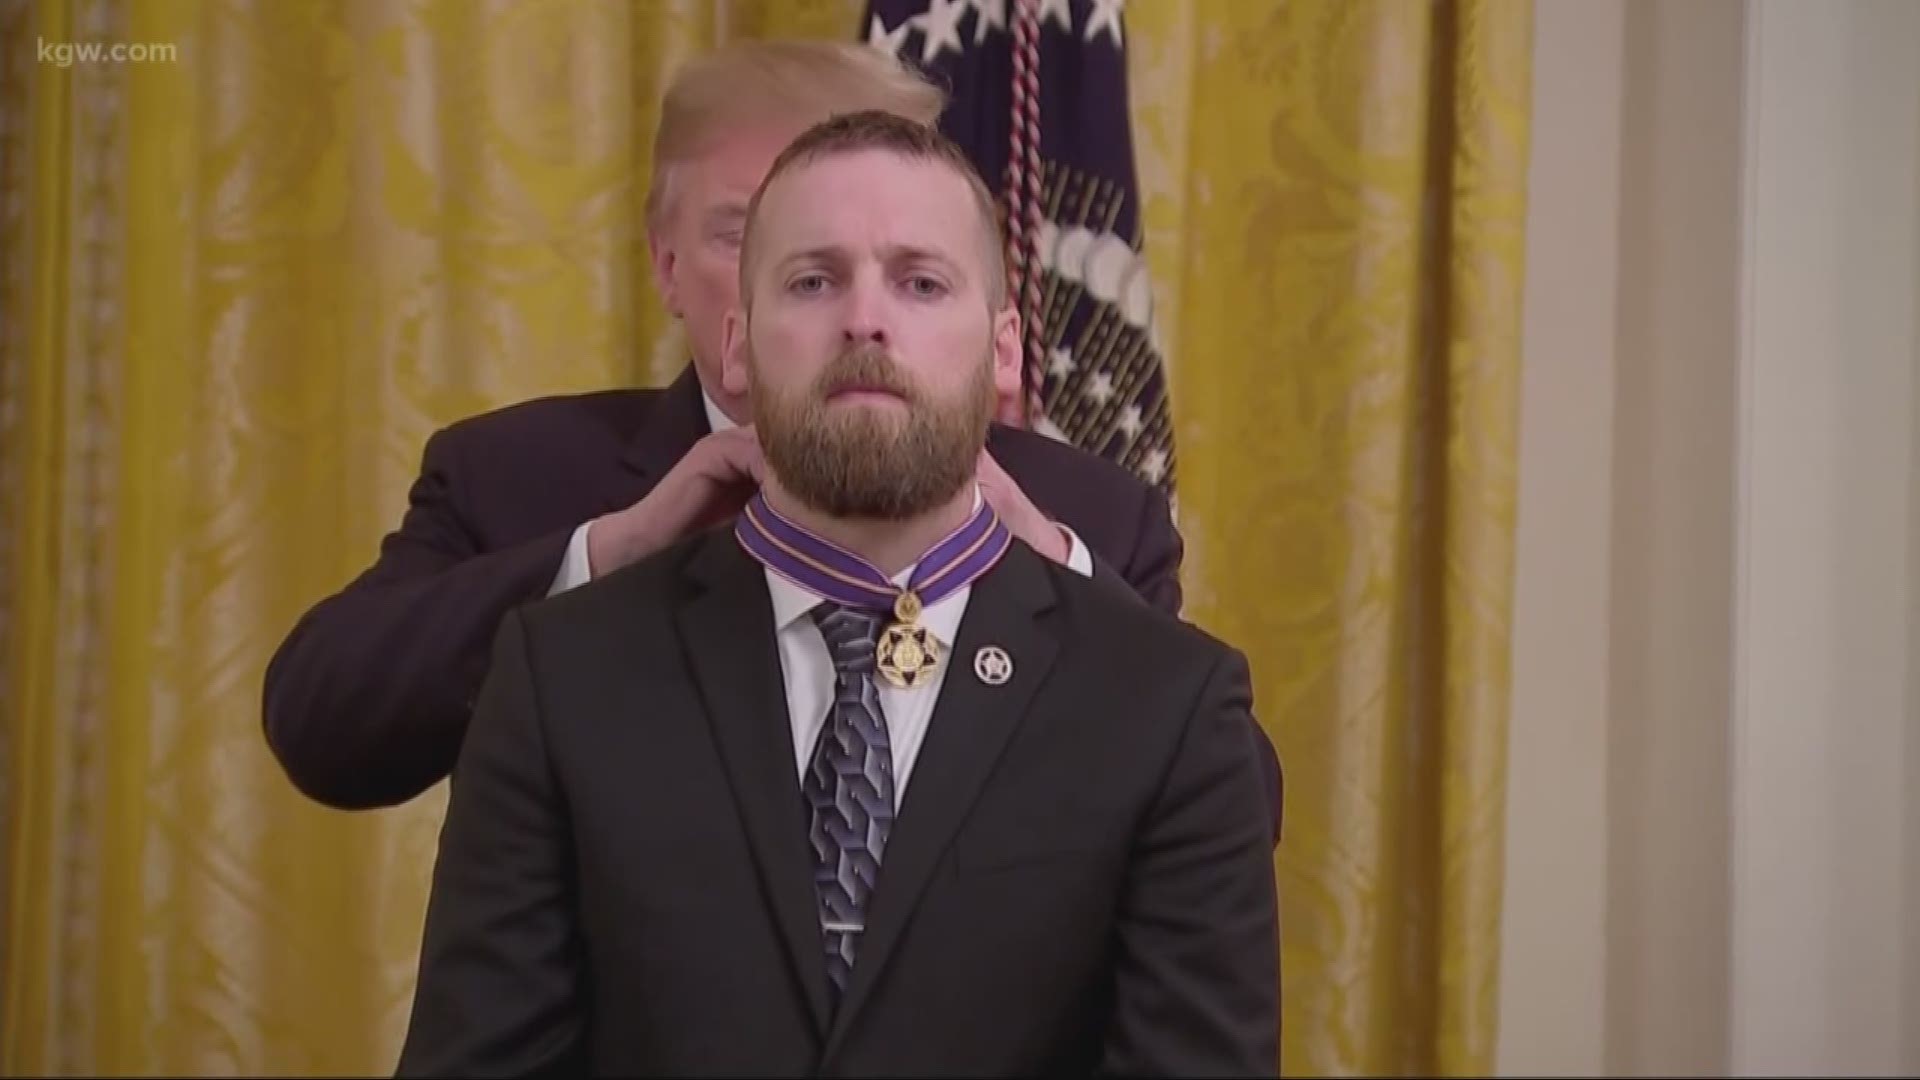 Oregon State Patrol Trooper Nic Cederberg was awarded the National Public Safety Officer Medal of Valor by President Donald Trump.